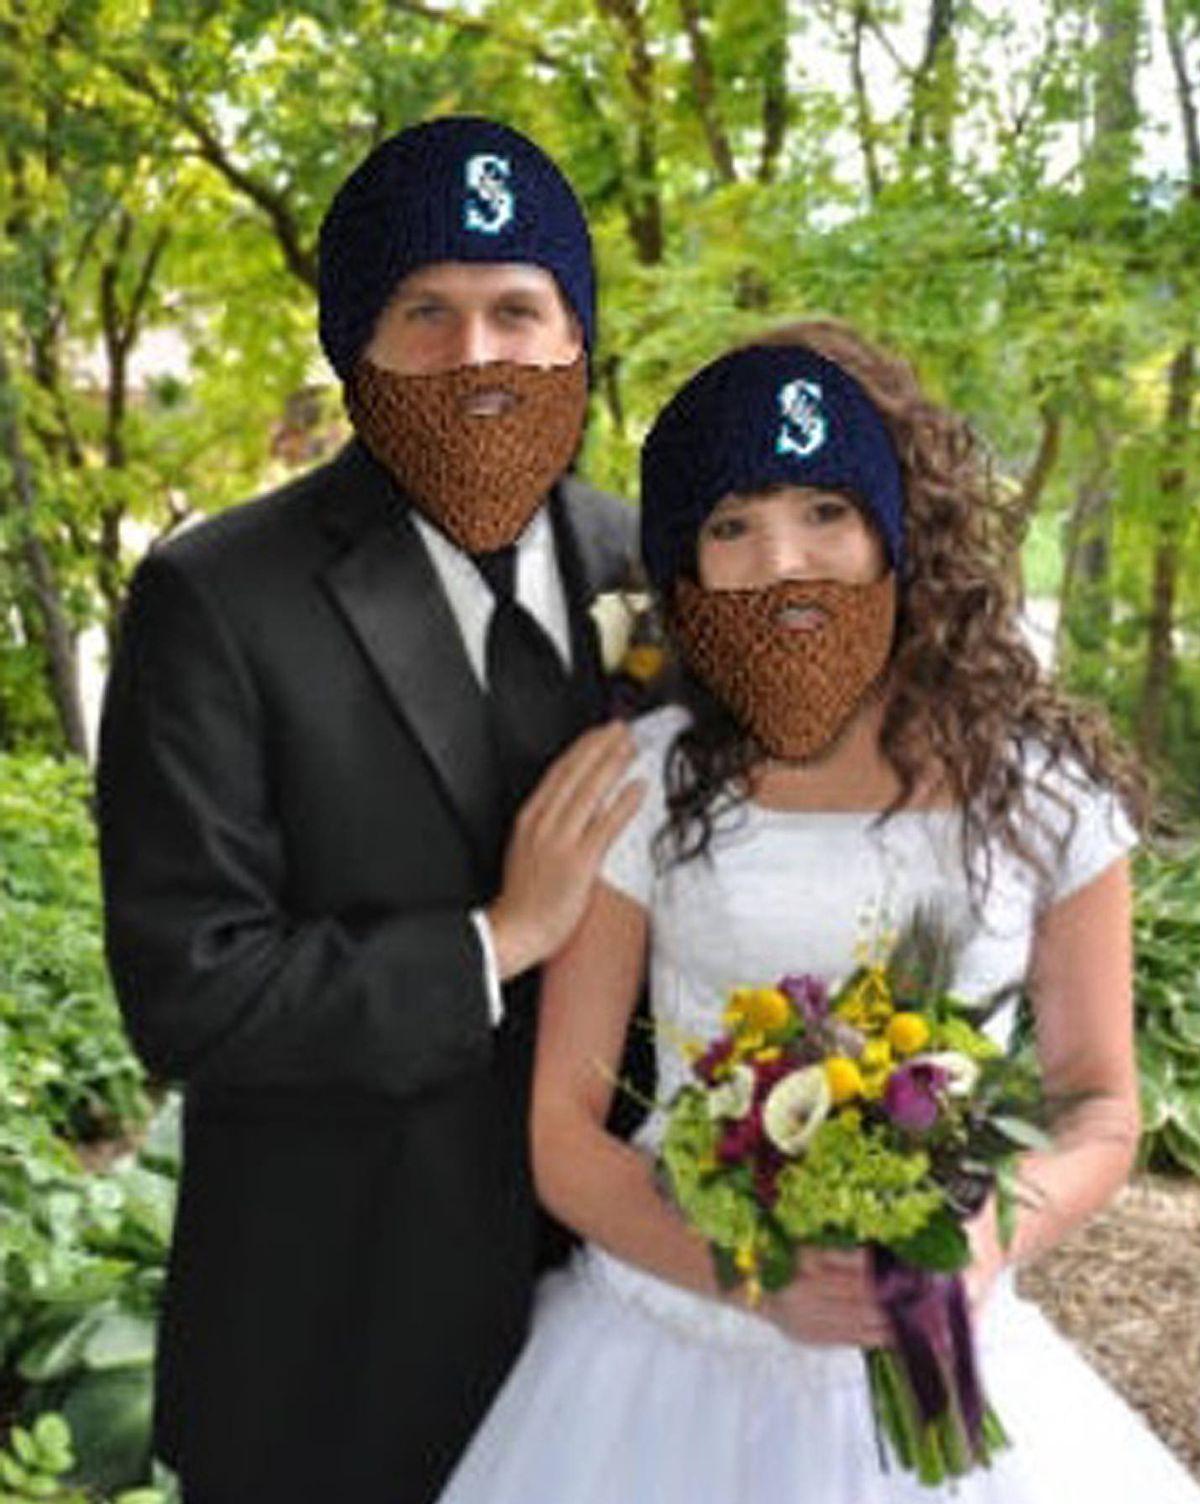 Jackson’s photo with the M’s beard hats superimposed won contest.